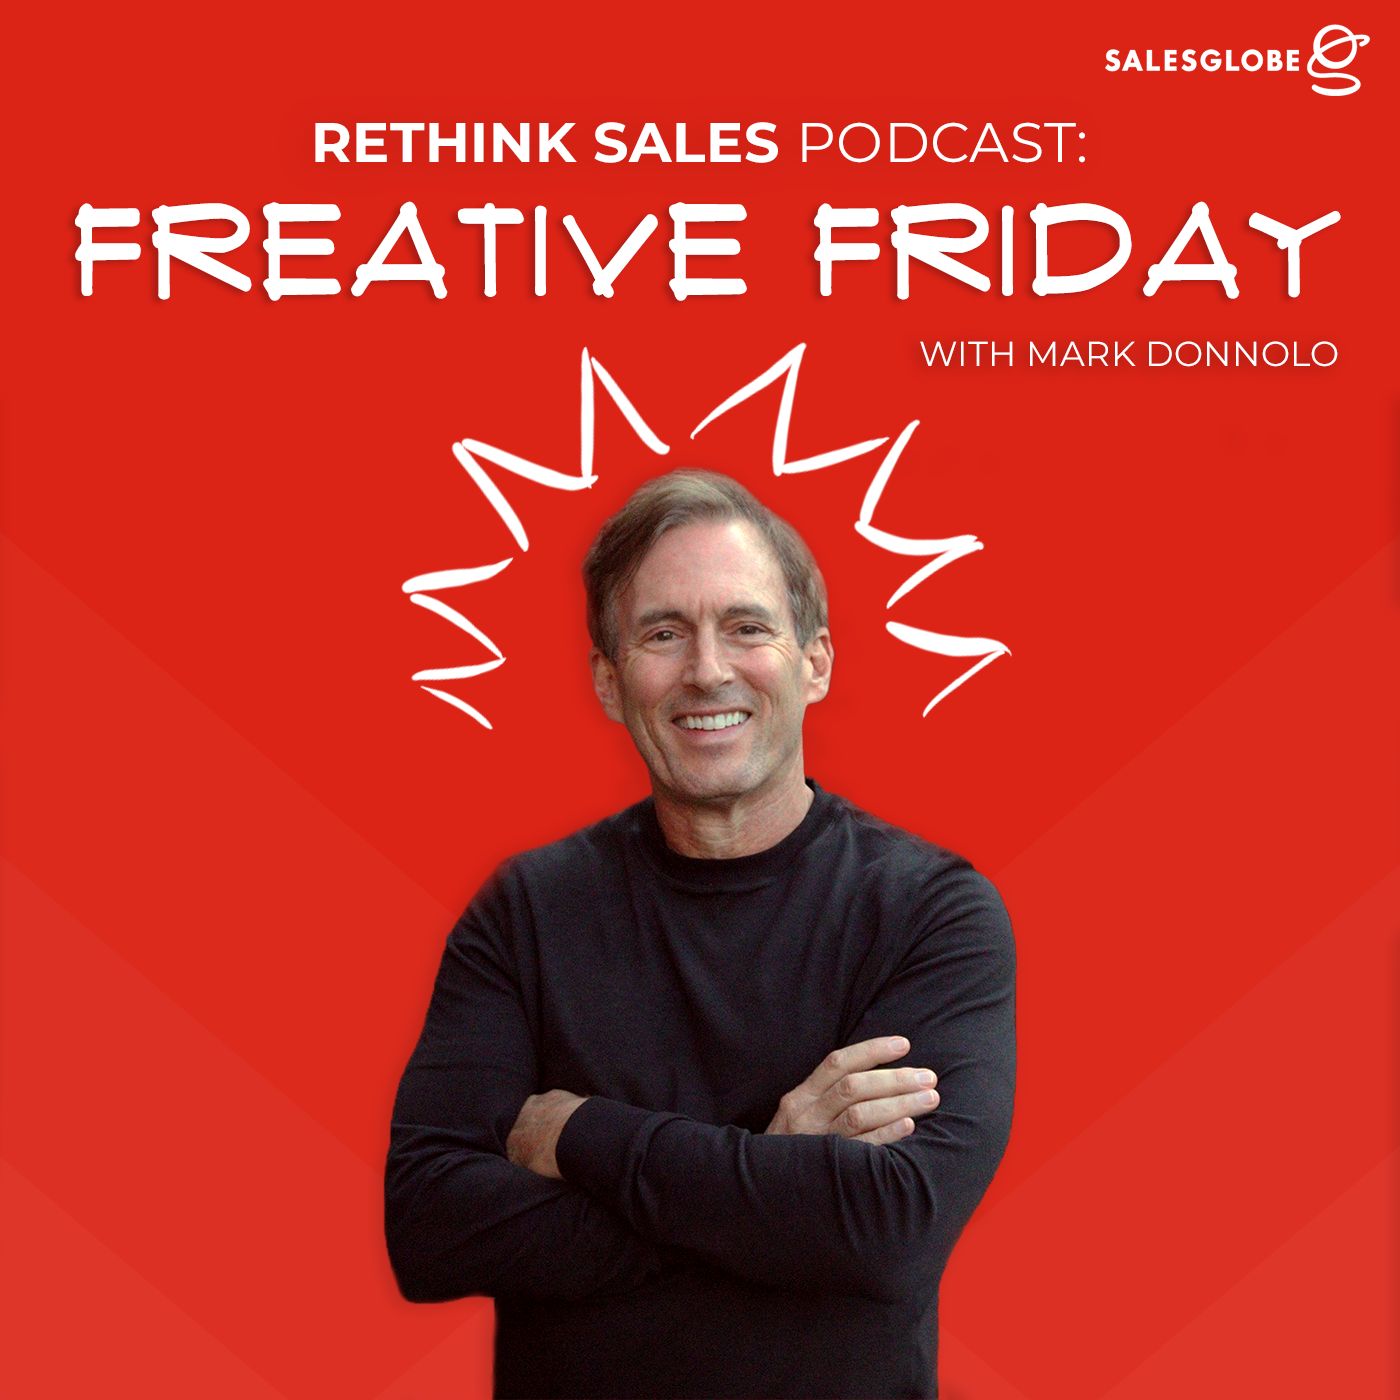 66: Freative Friday - Increasing ROSI by Pumping Up Your Pipeline Part 1